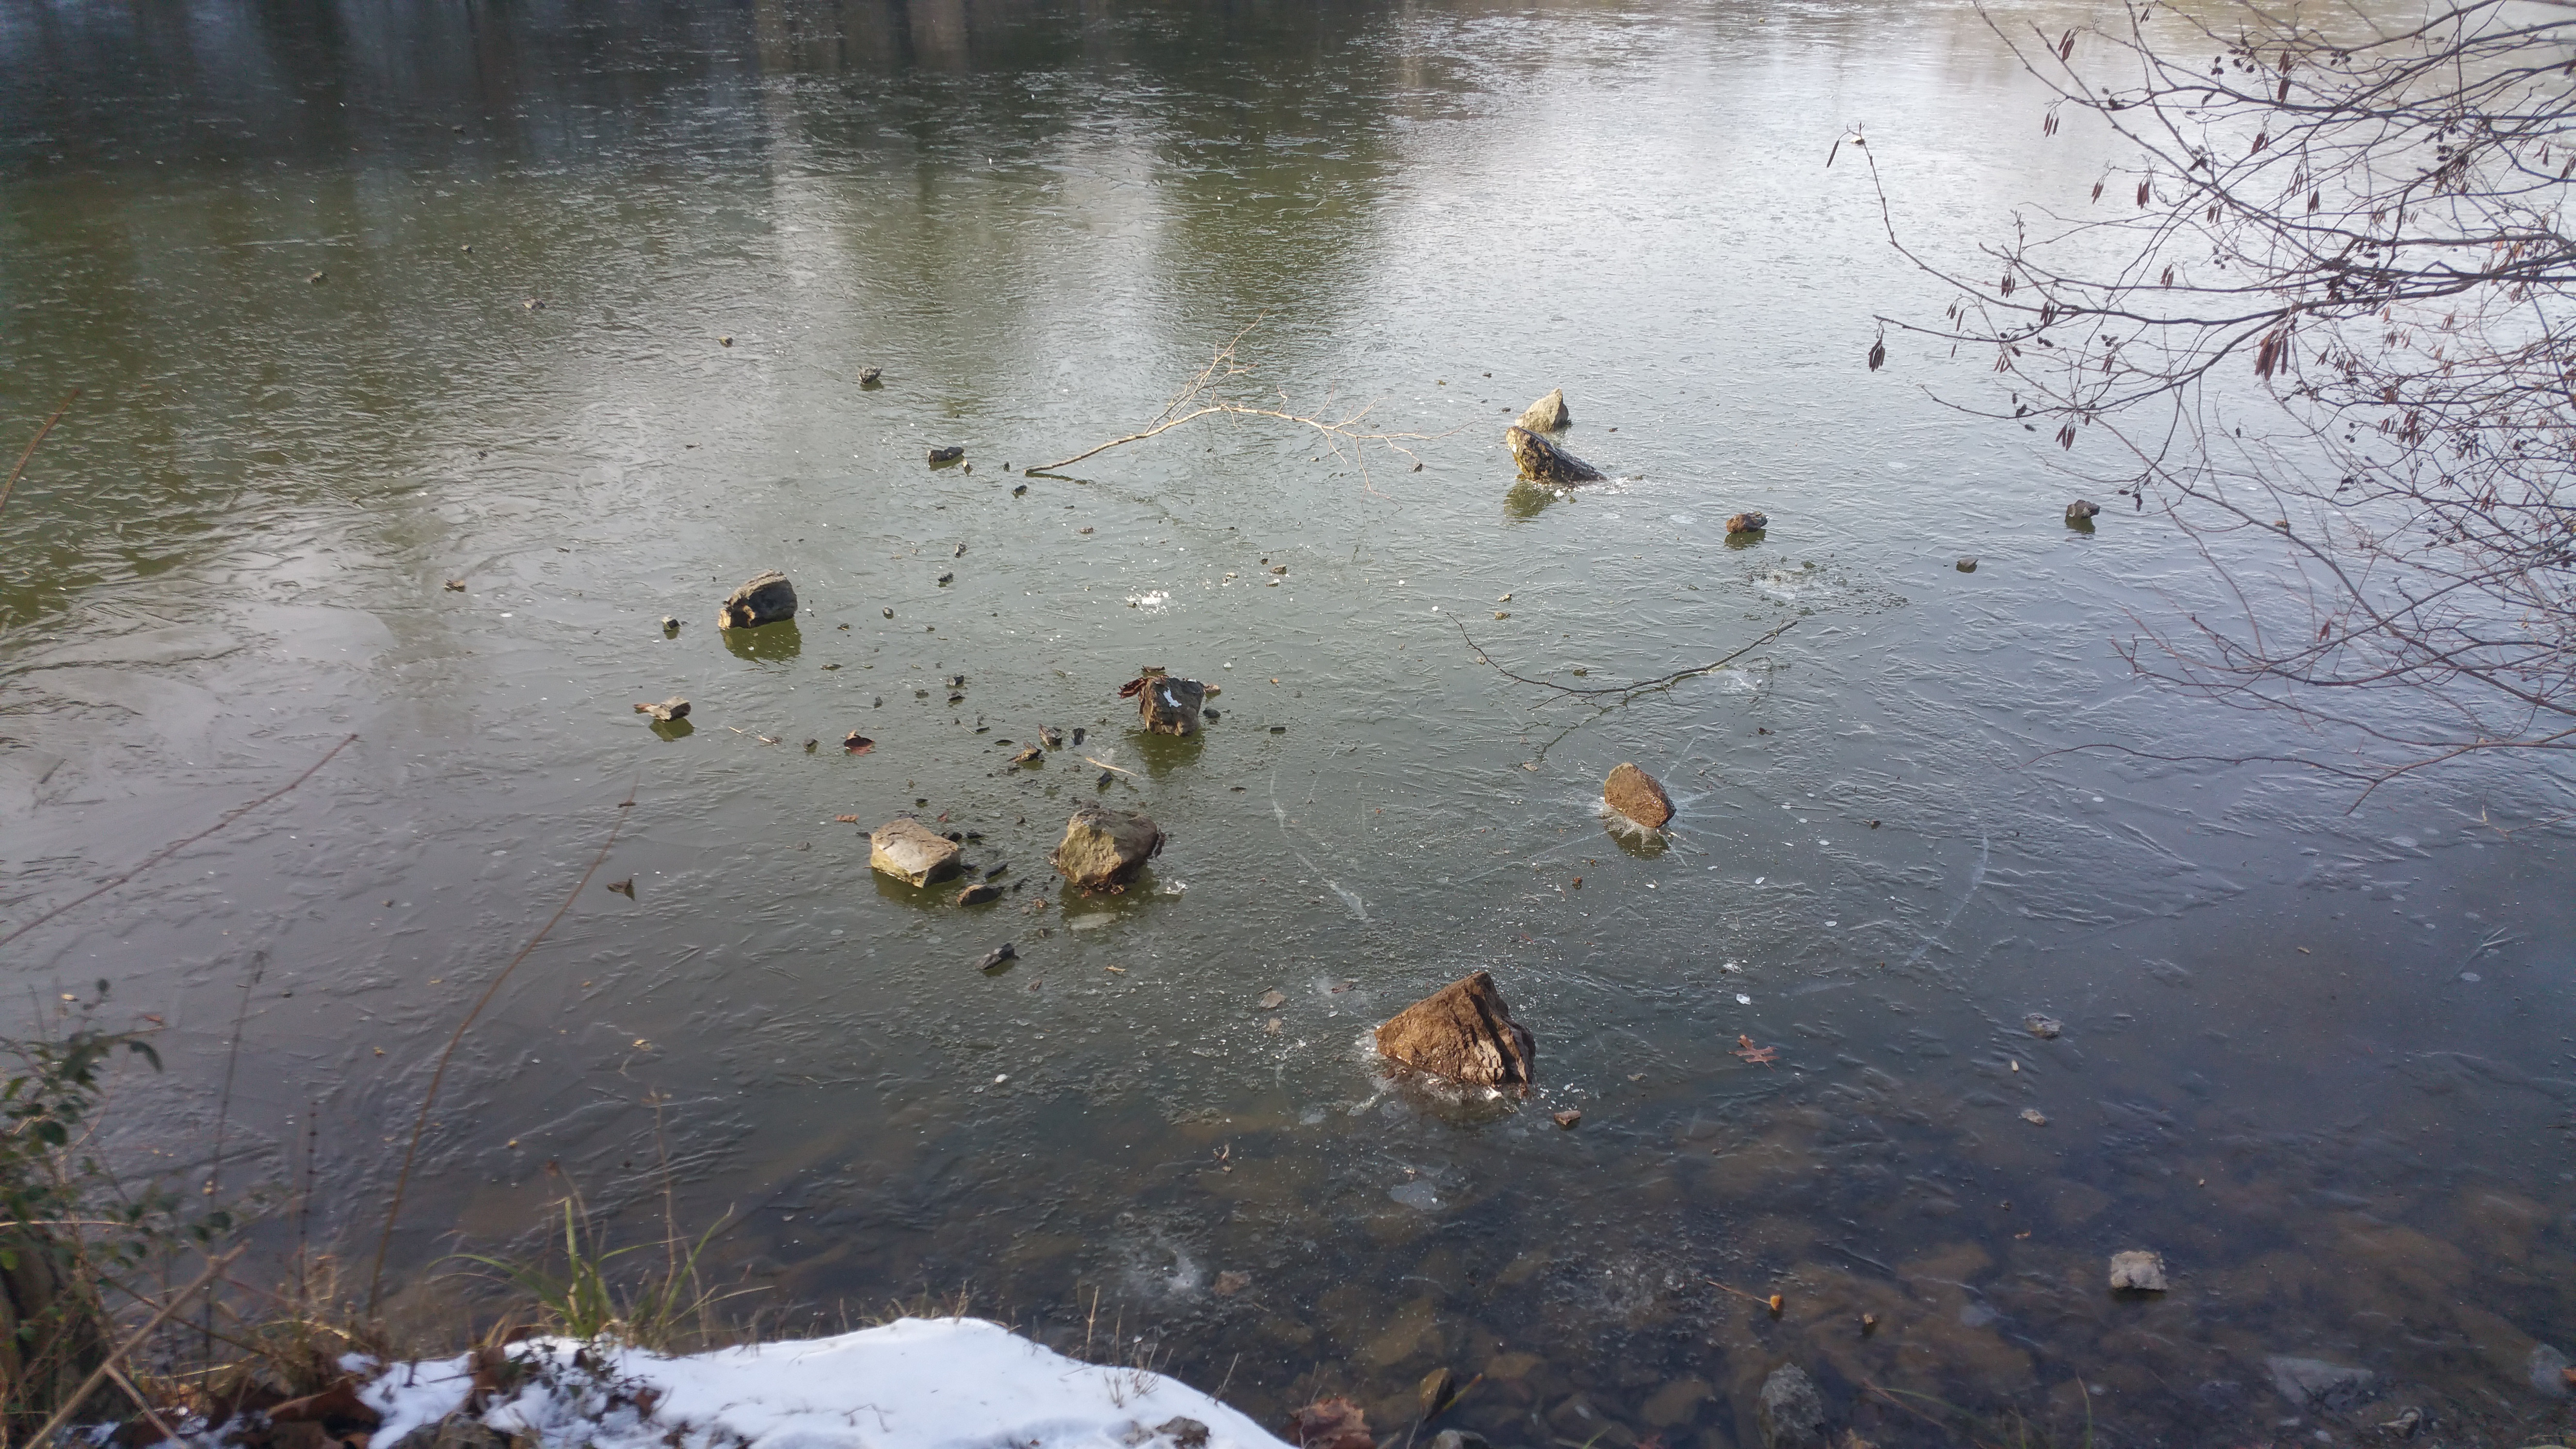 Throwing rocks into a frozen pond - GIF on Imgur